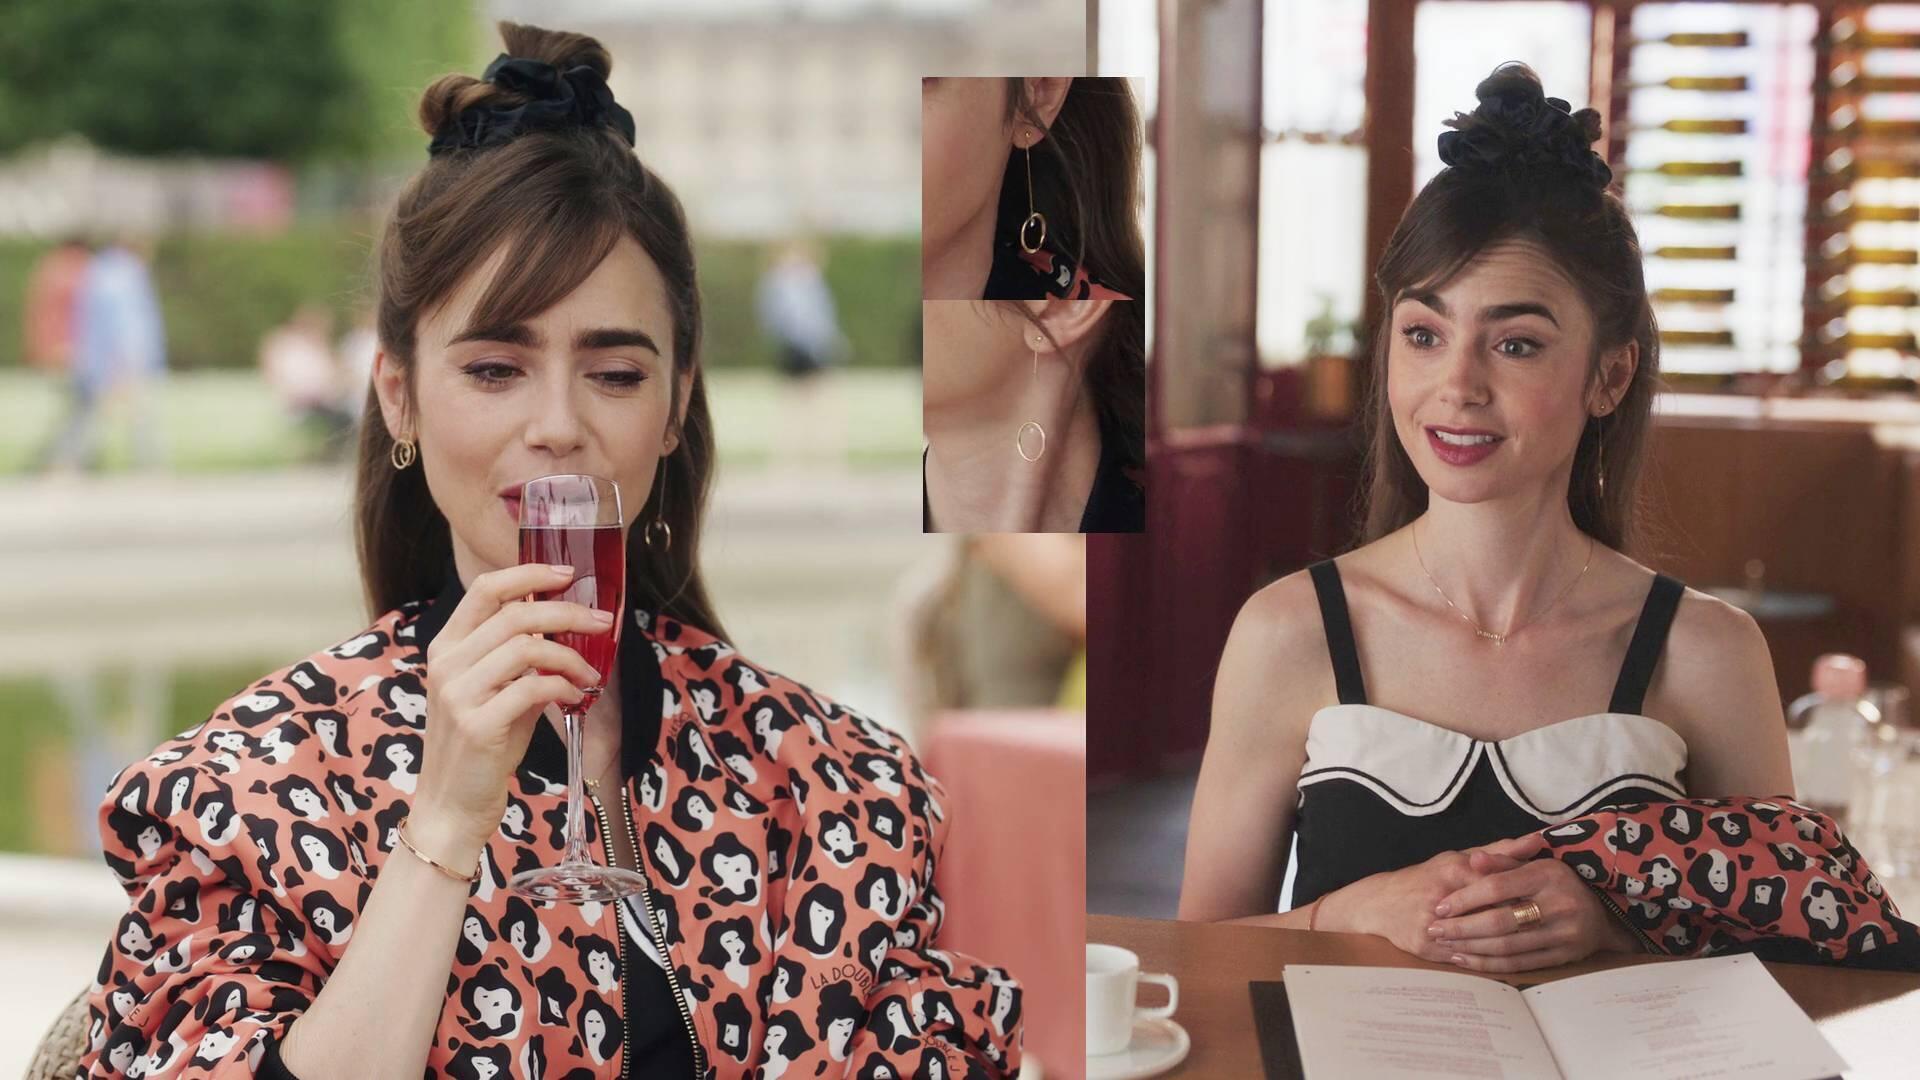 Lily Collins - Emily In Paris | Season 3 Episode 4 | Lily Collins style